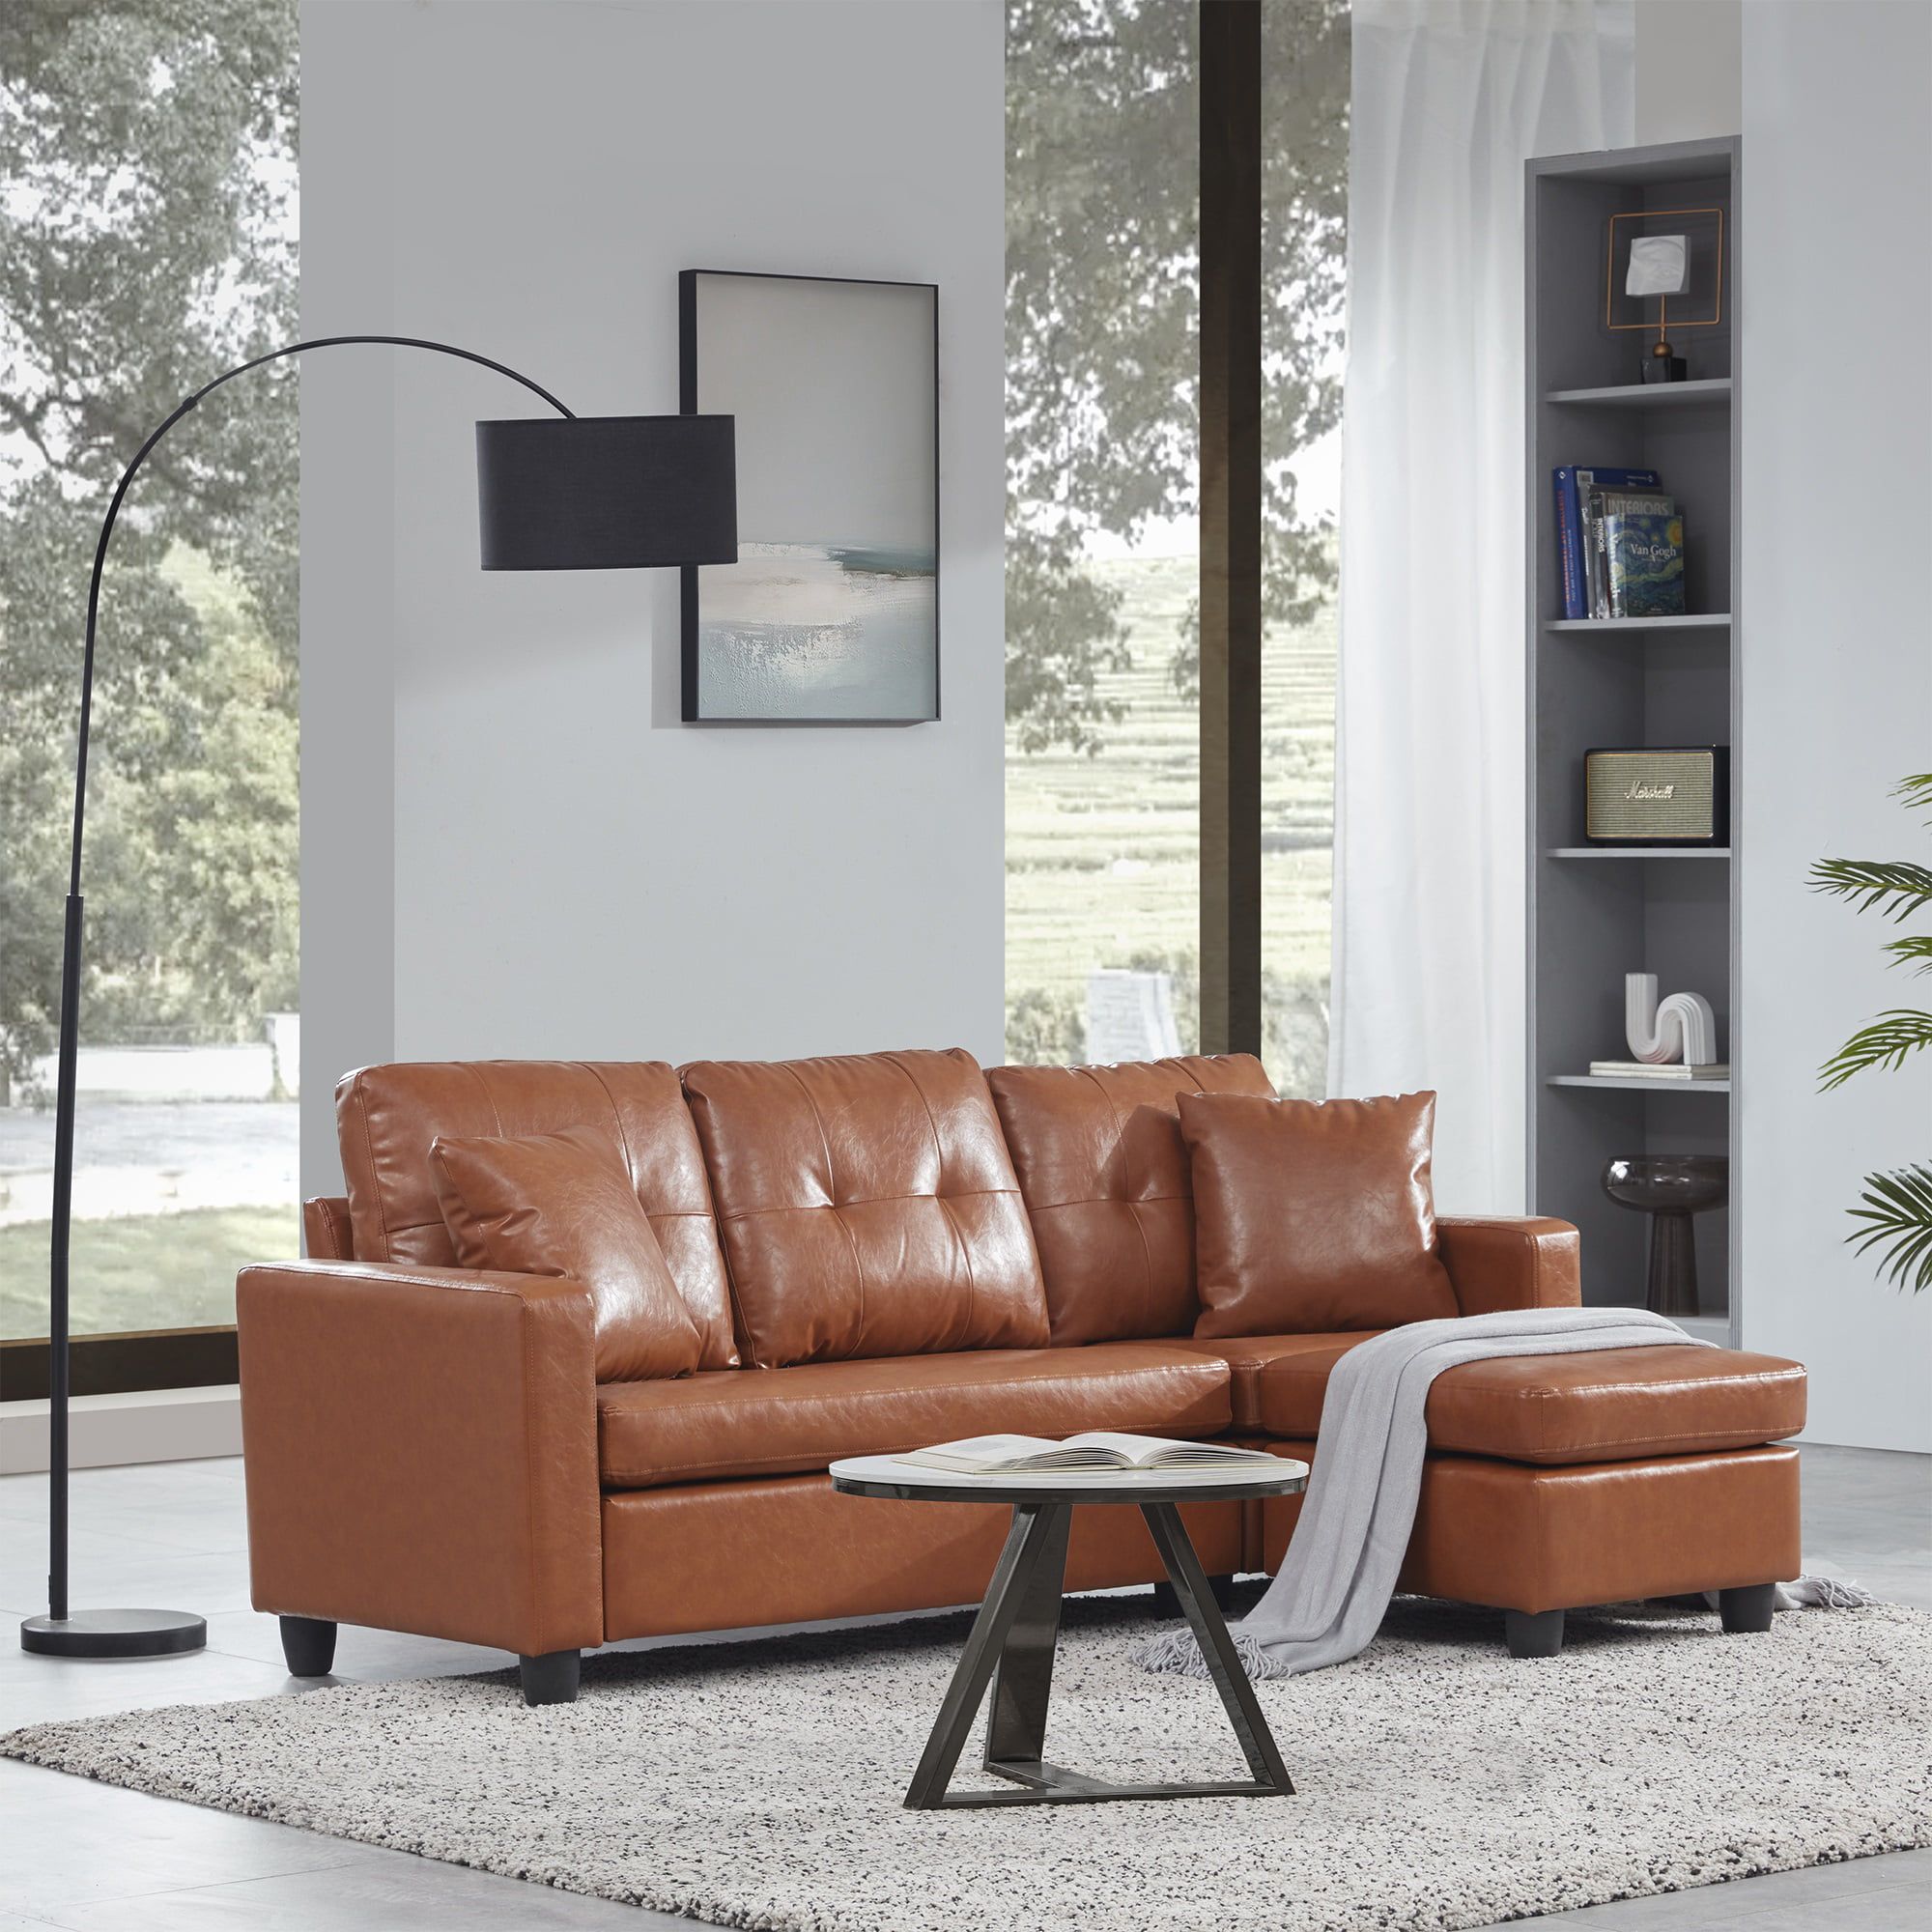 Belleze Altera Convertible Sectional Sofa, Modern Faux Leather L Shaped Couch  3 Seat With Reversible Chaise For Small Space, Caramel – Walmart In 3 Seat Convertible Sectional Sofas (Photo 8 of 15)